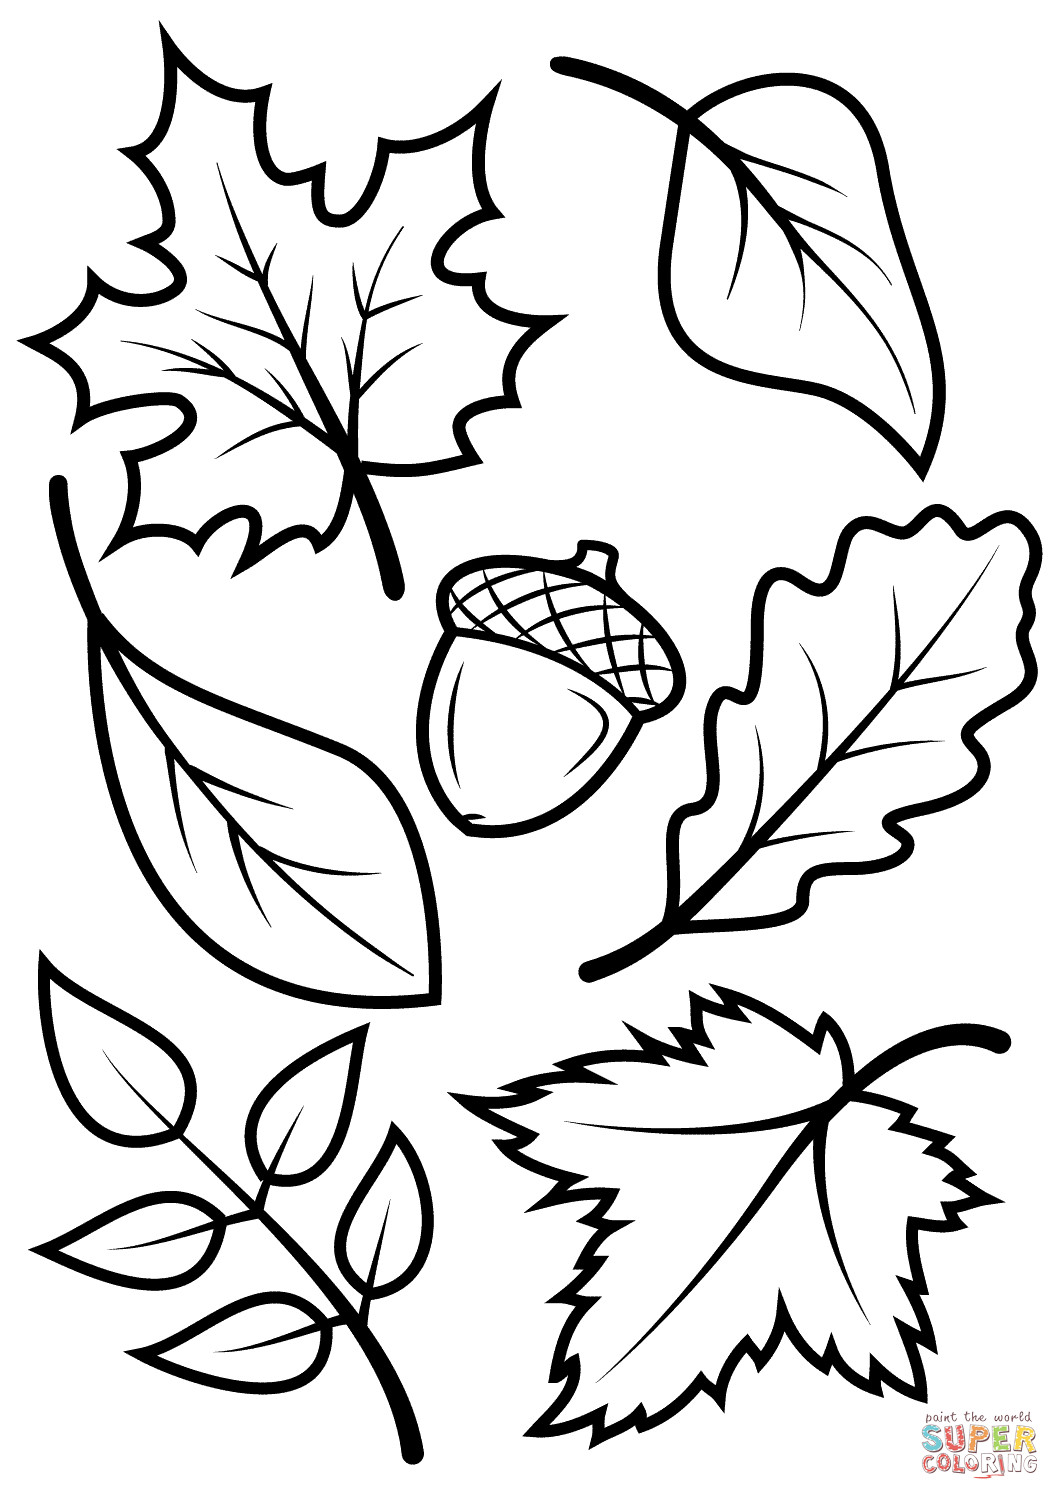 Autumn Leaves Coloring Pages
 Fall Leaves and Acorn coloring page